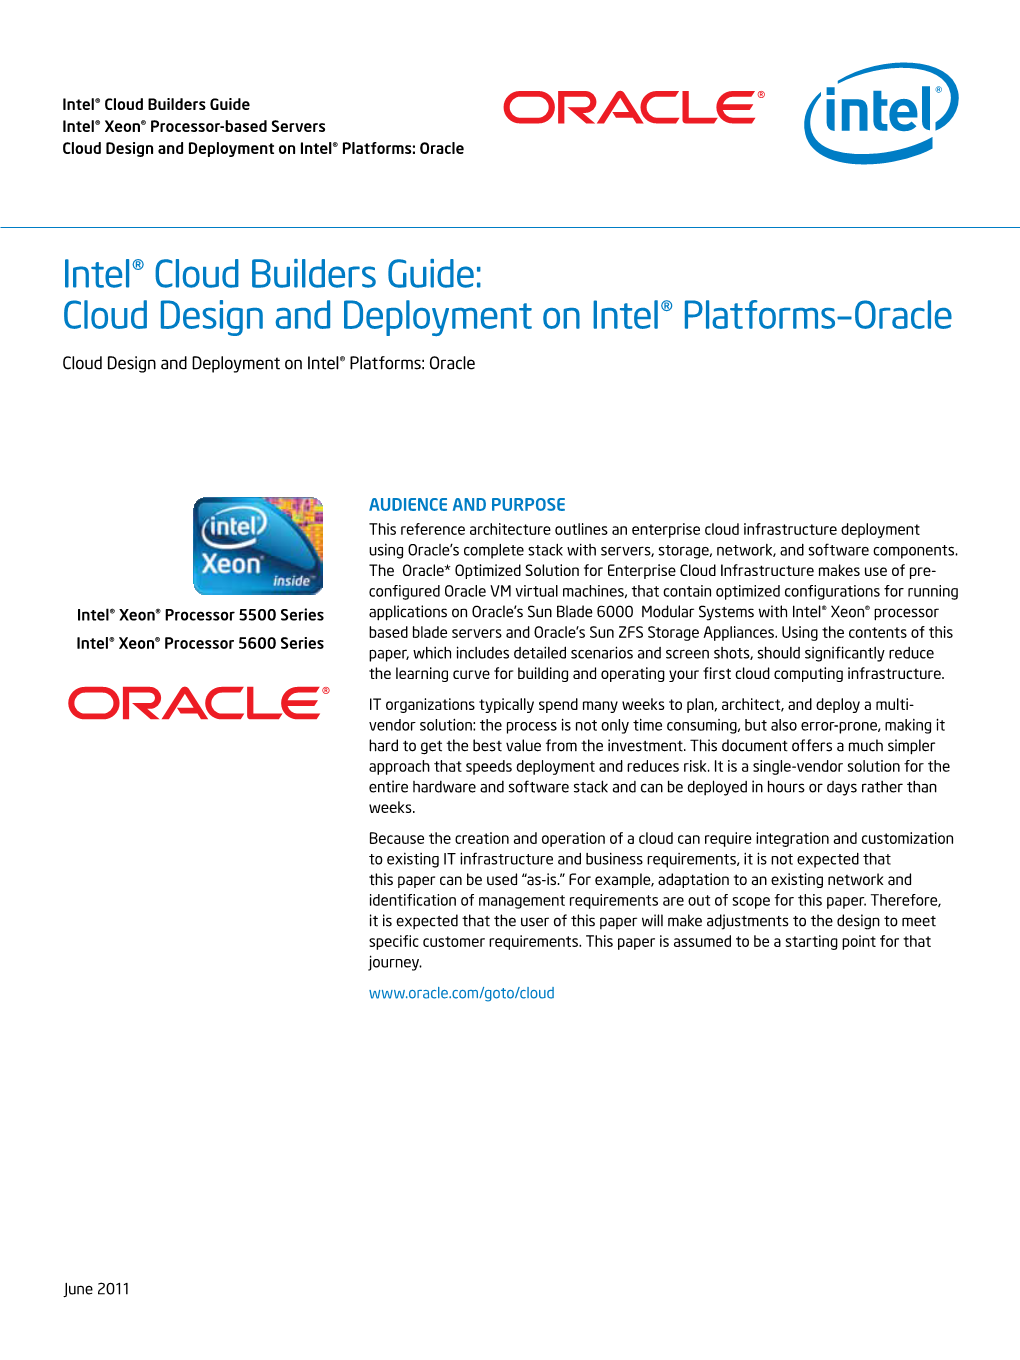 Cloud Design and Deployment on Intel® Platforms-Oracle